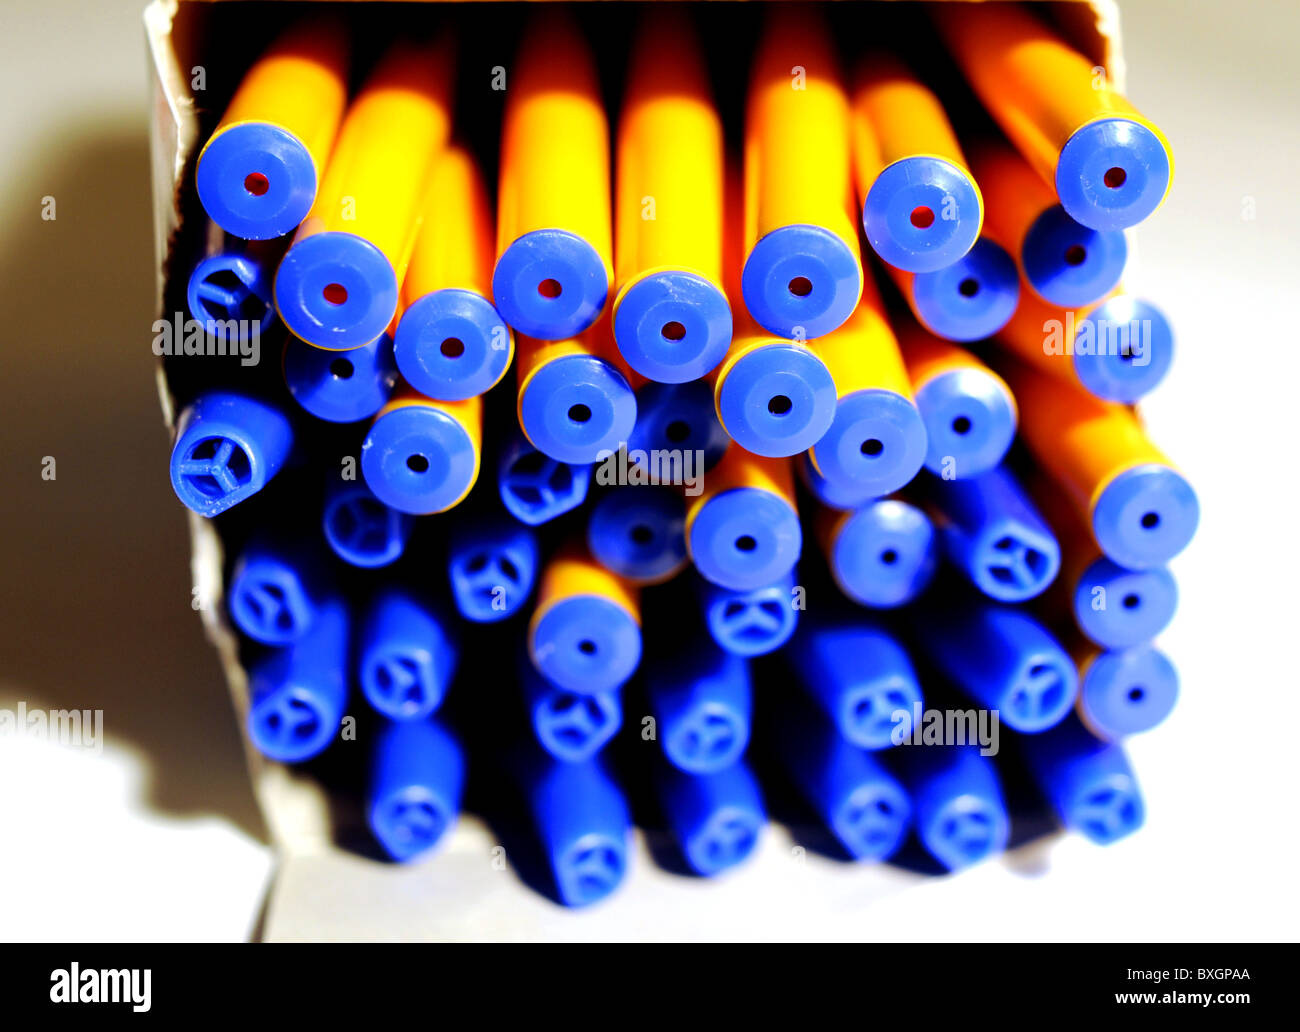 Office stationary and equipment biro pens in blue and yellow Stock Photo